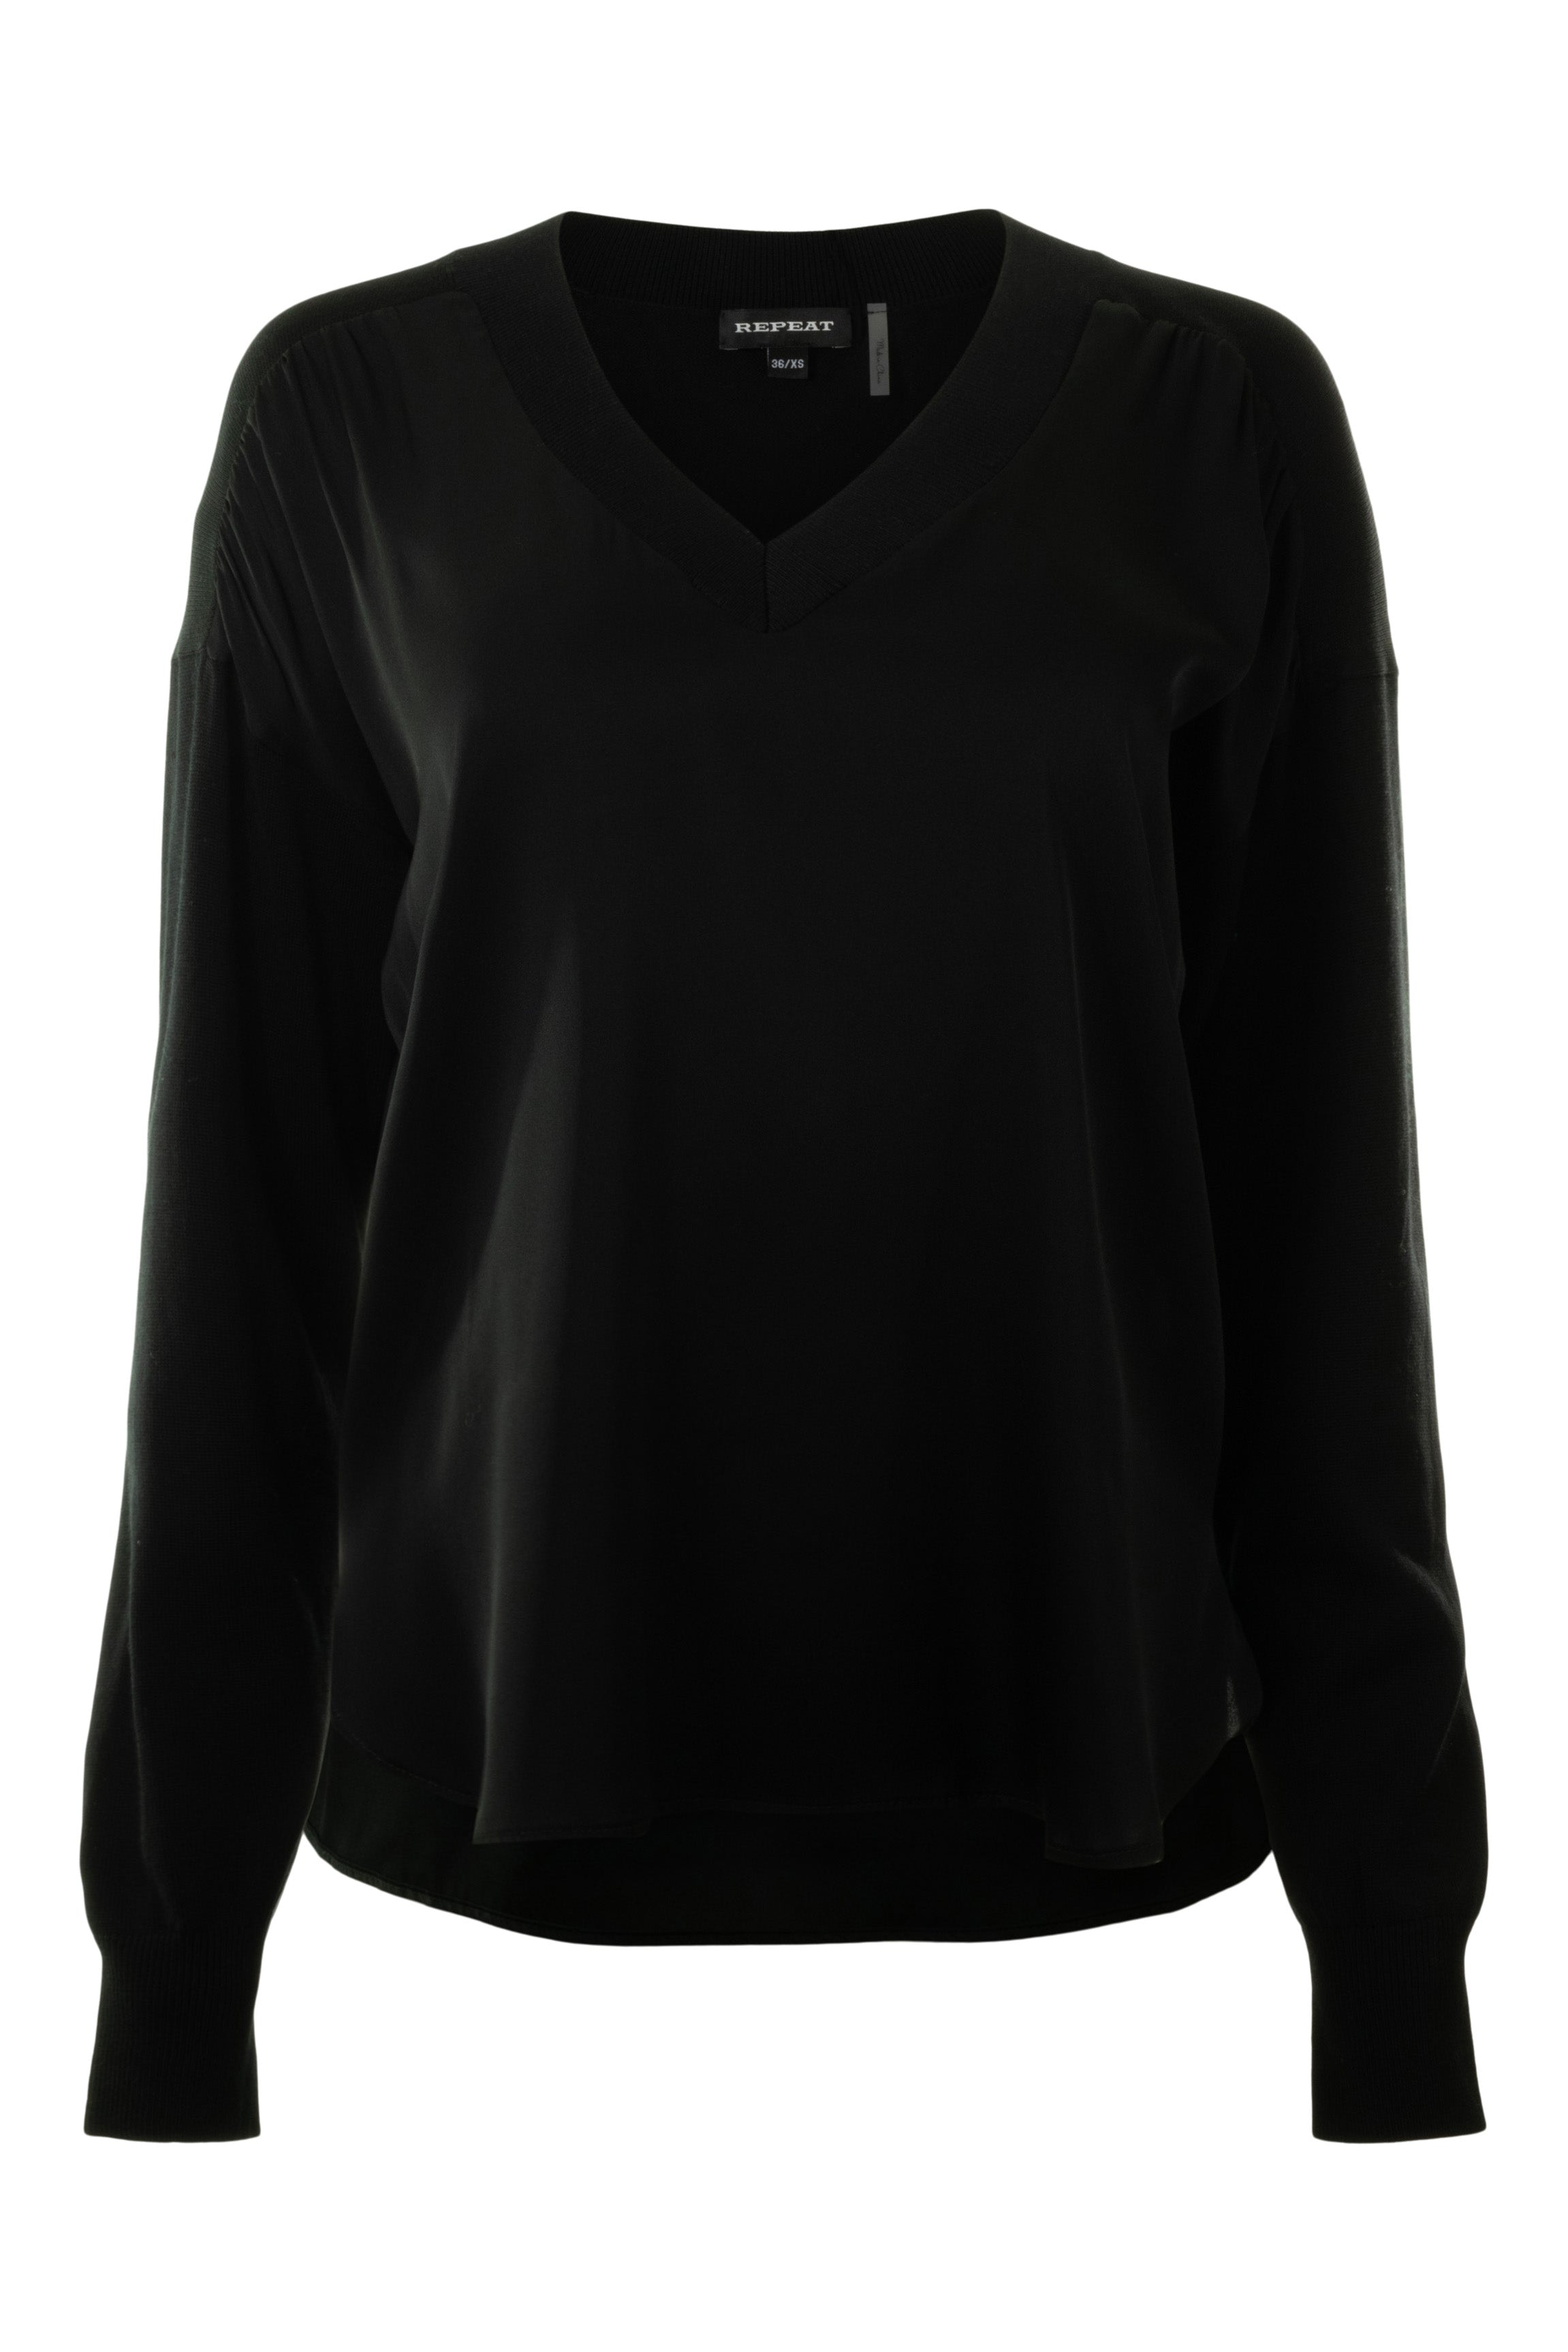 Repeat Cashmere Mixed Media Sweater in Black